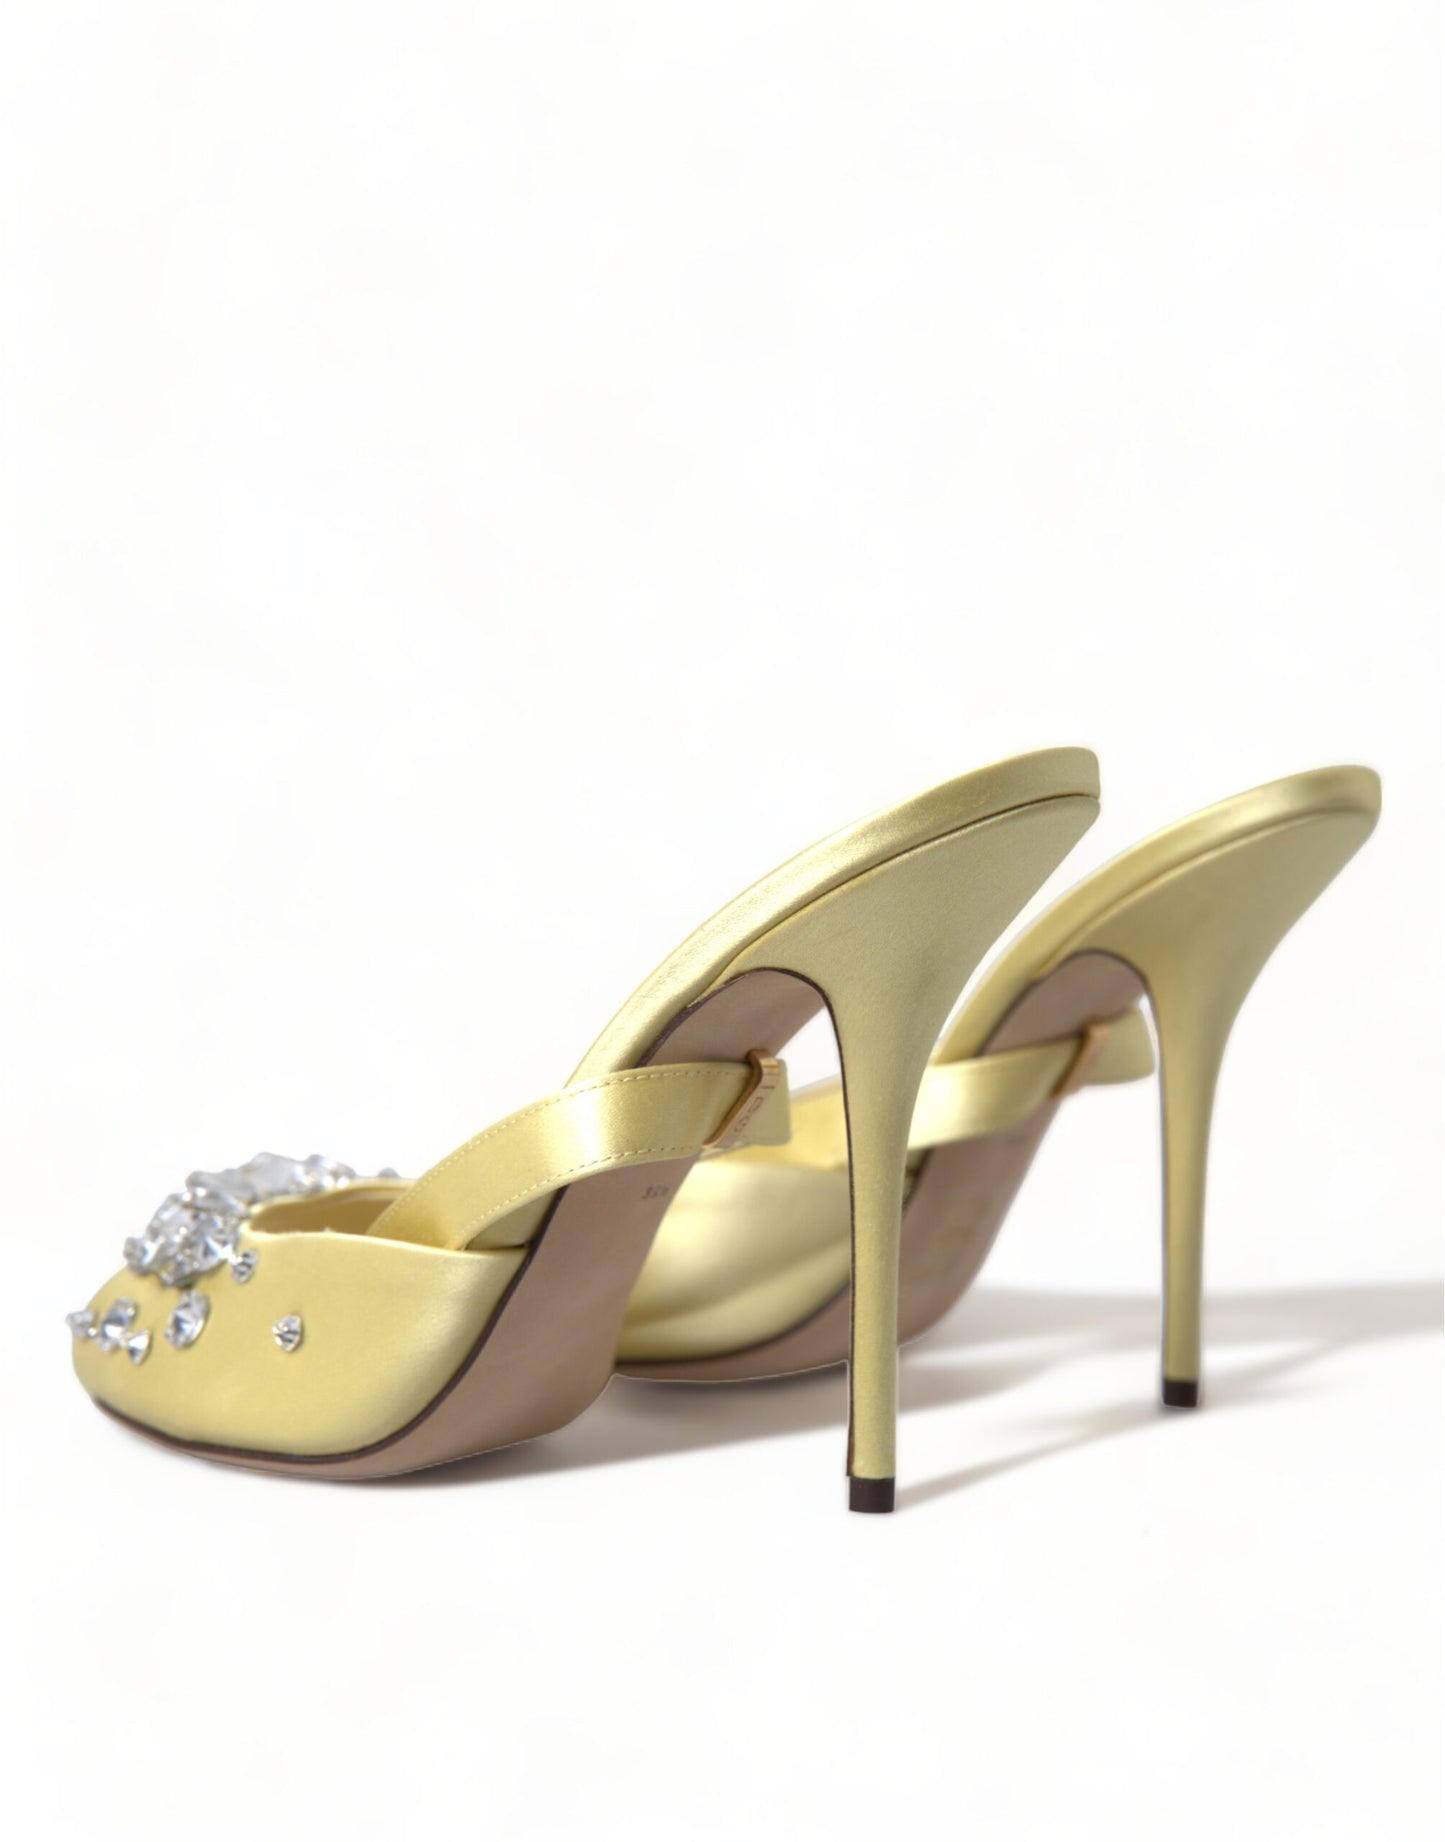 Yellow Satin Crystal Mary Janes Sandals